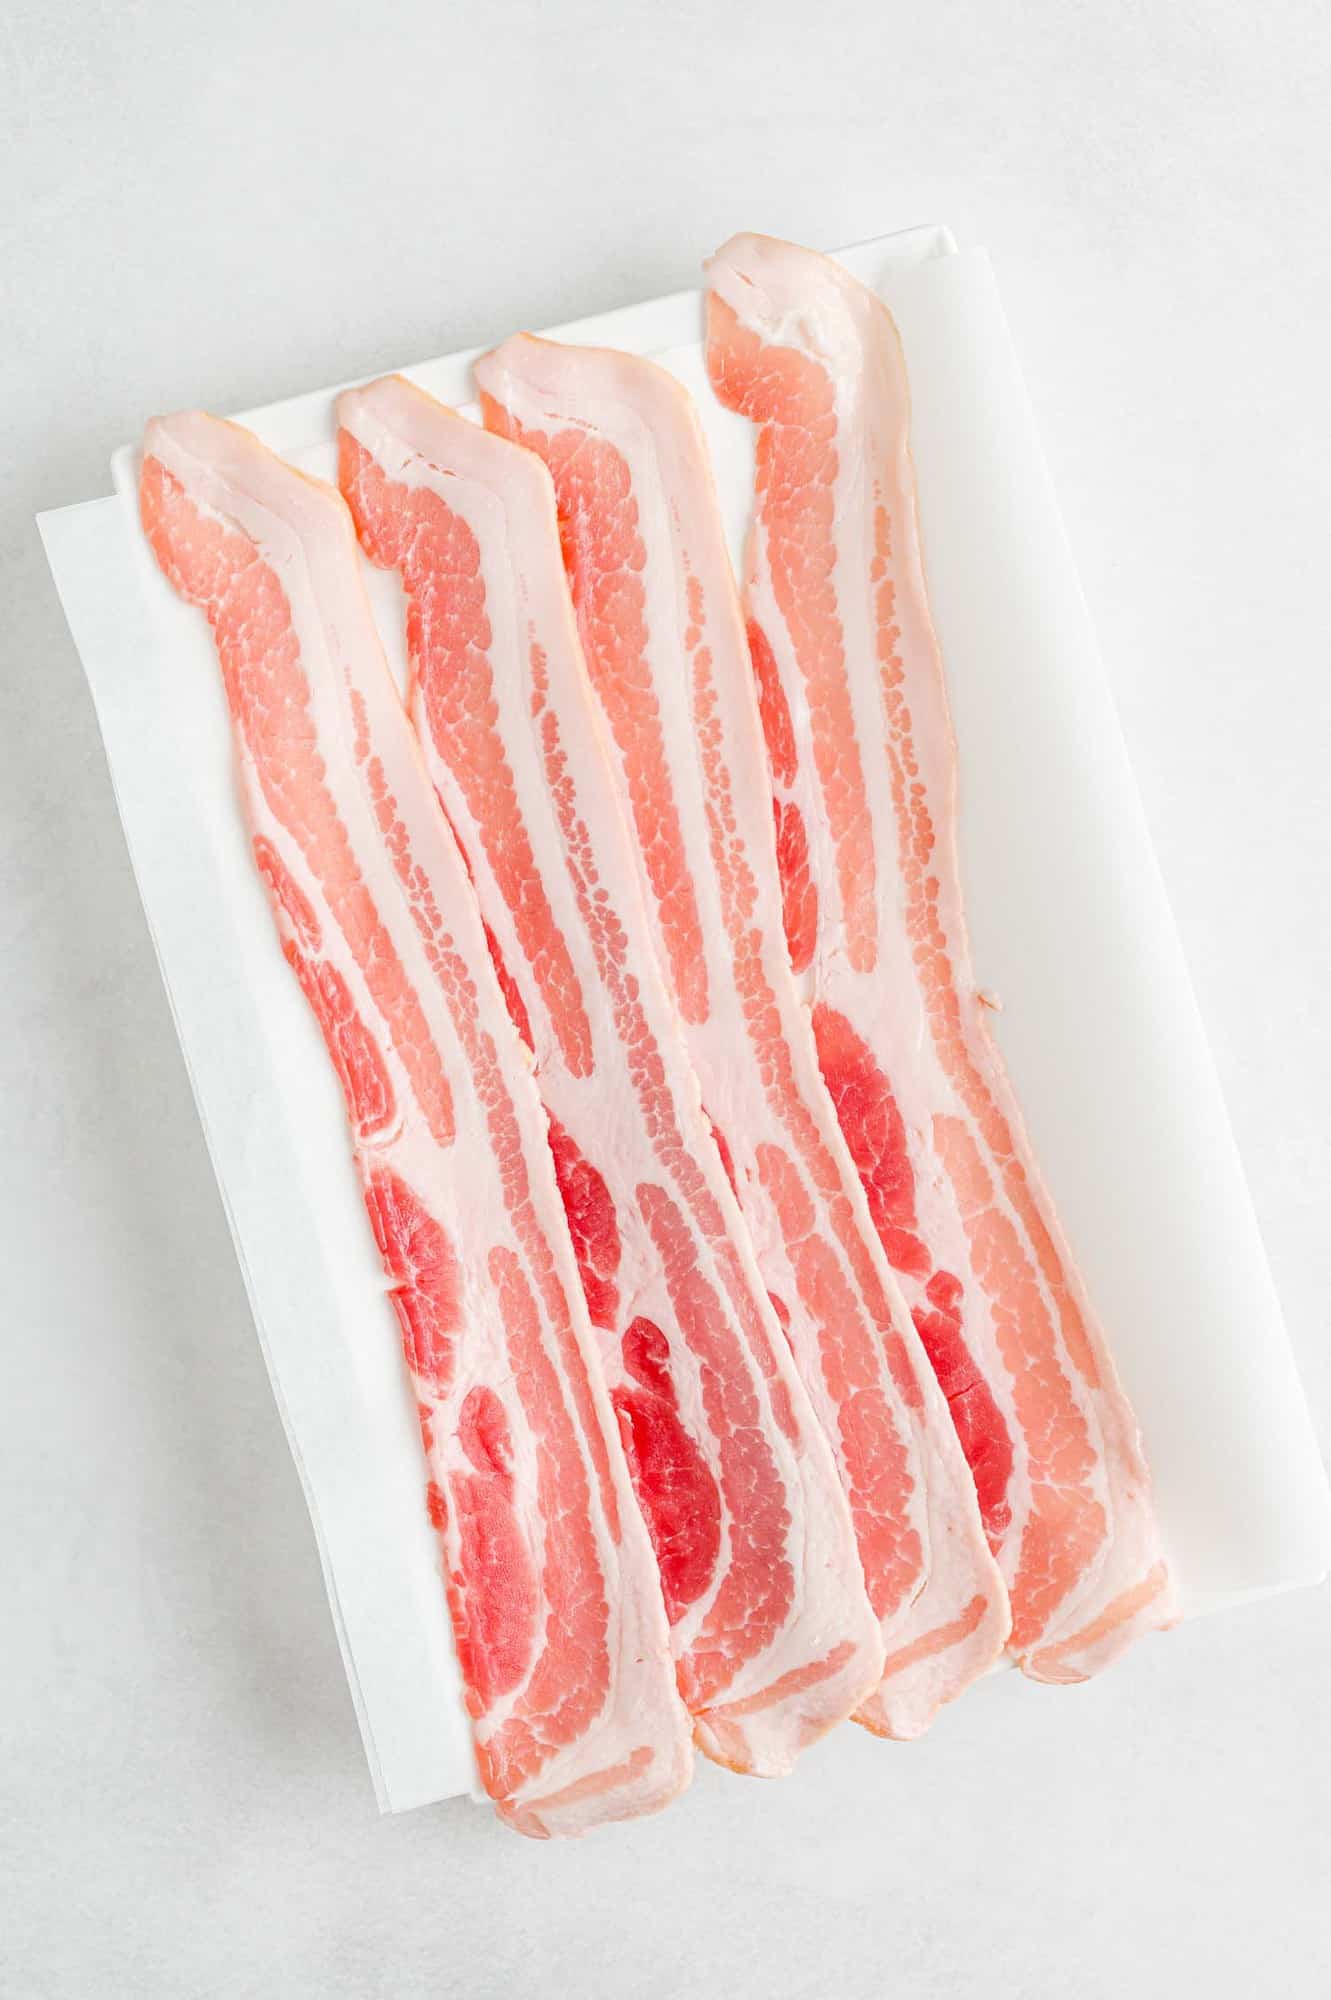 Uncooked bacon.